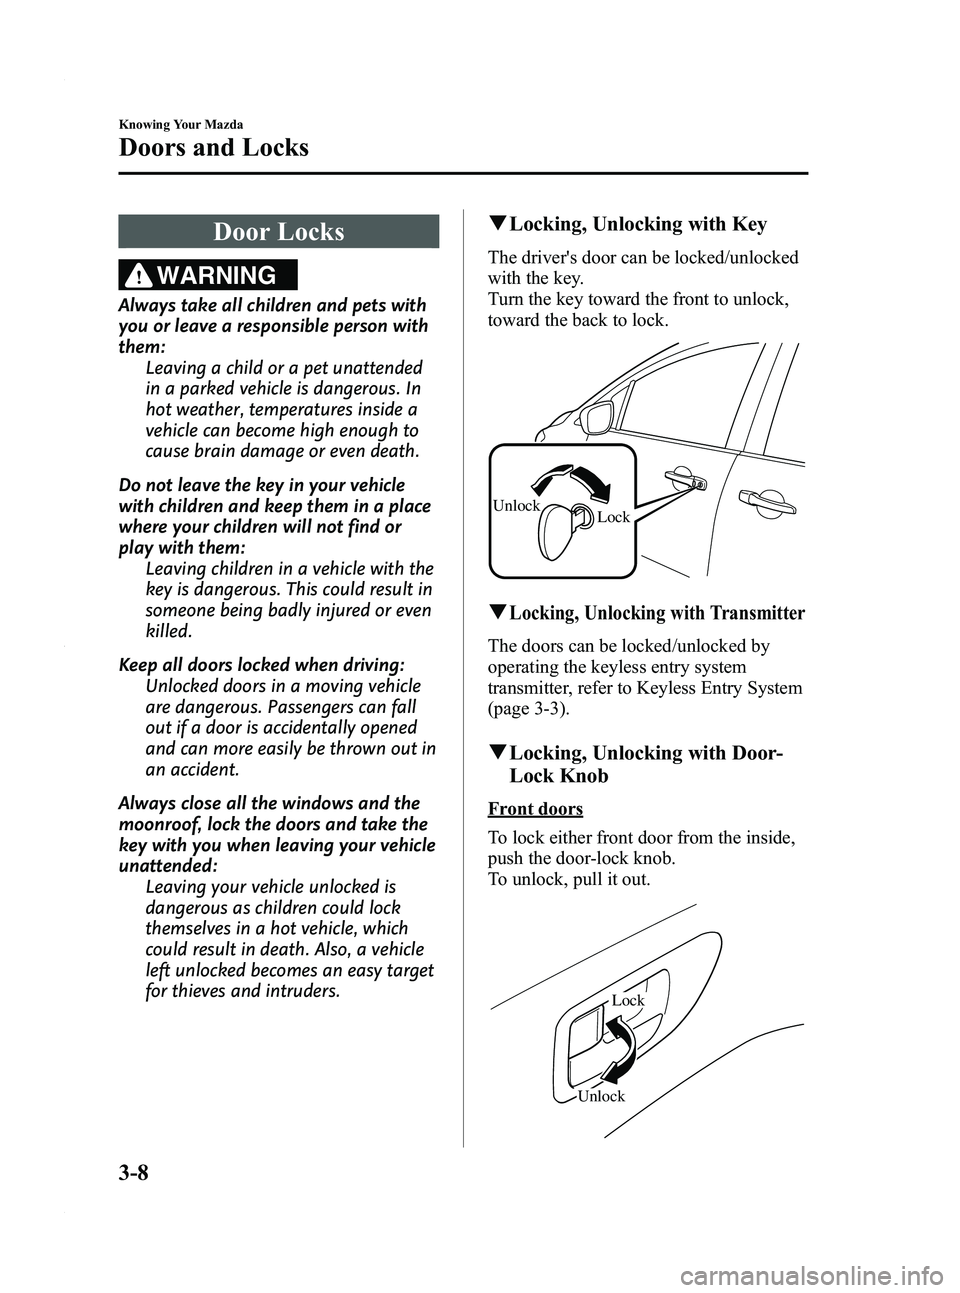 MAZDA MODEL 5 2010  Owners Manual Black plate (74,1)
Door Locks
WARNING
Always take all children and pets with
you or leave a responsible person with
them:Leaving a child or a pet unattended
in a parked vehicle is dangerous. In
hot we